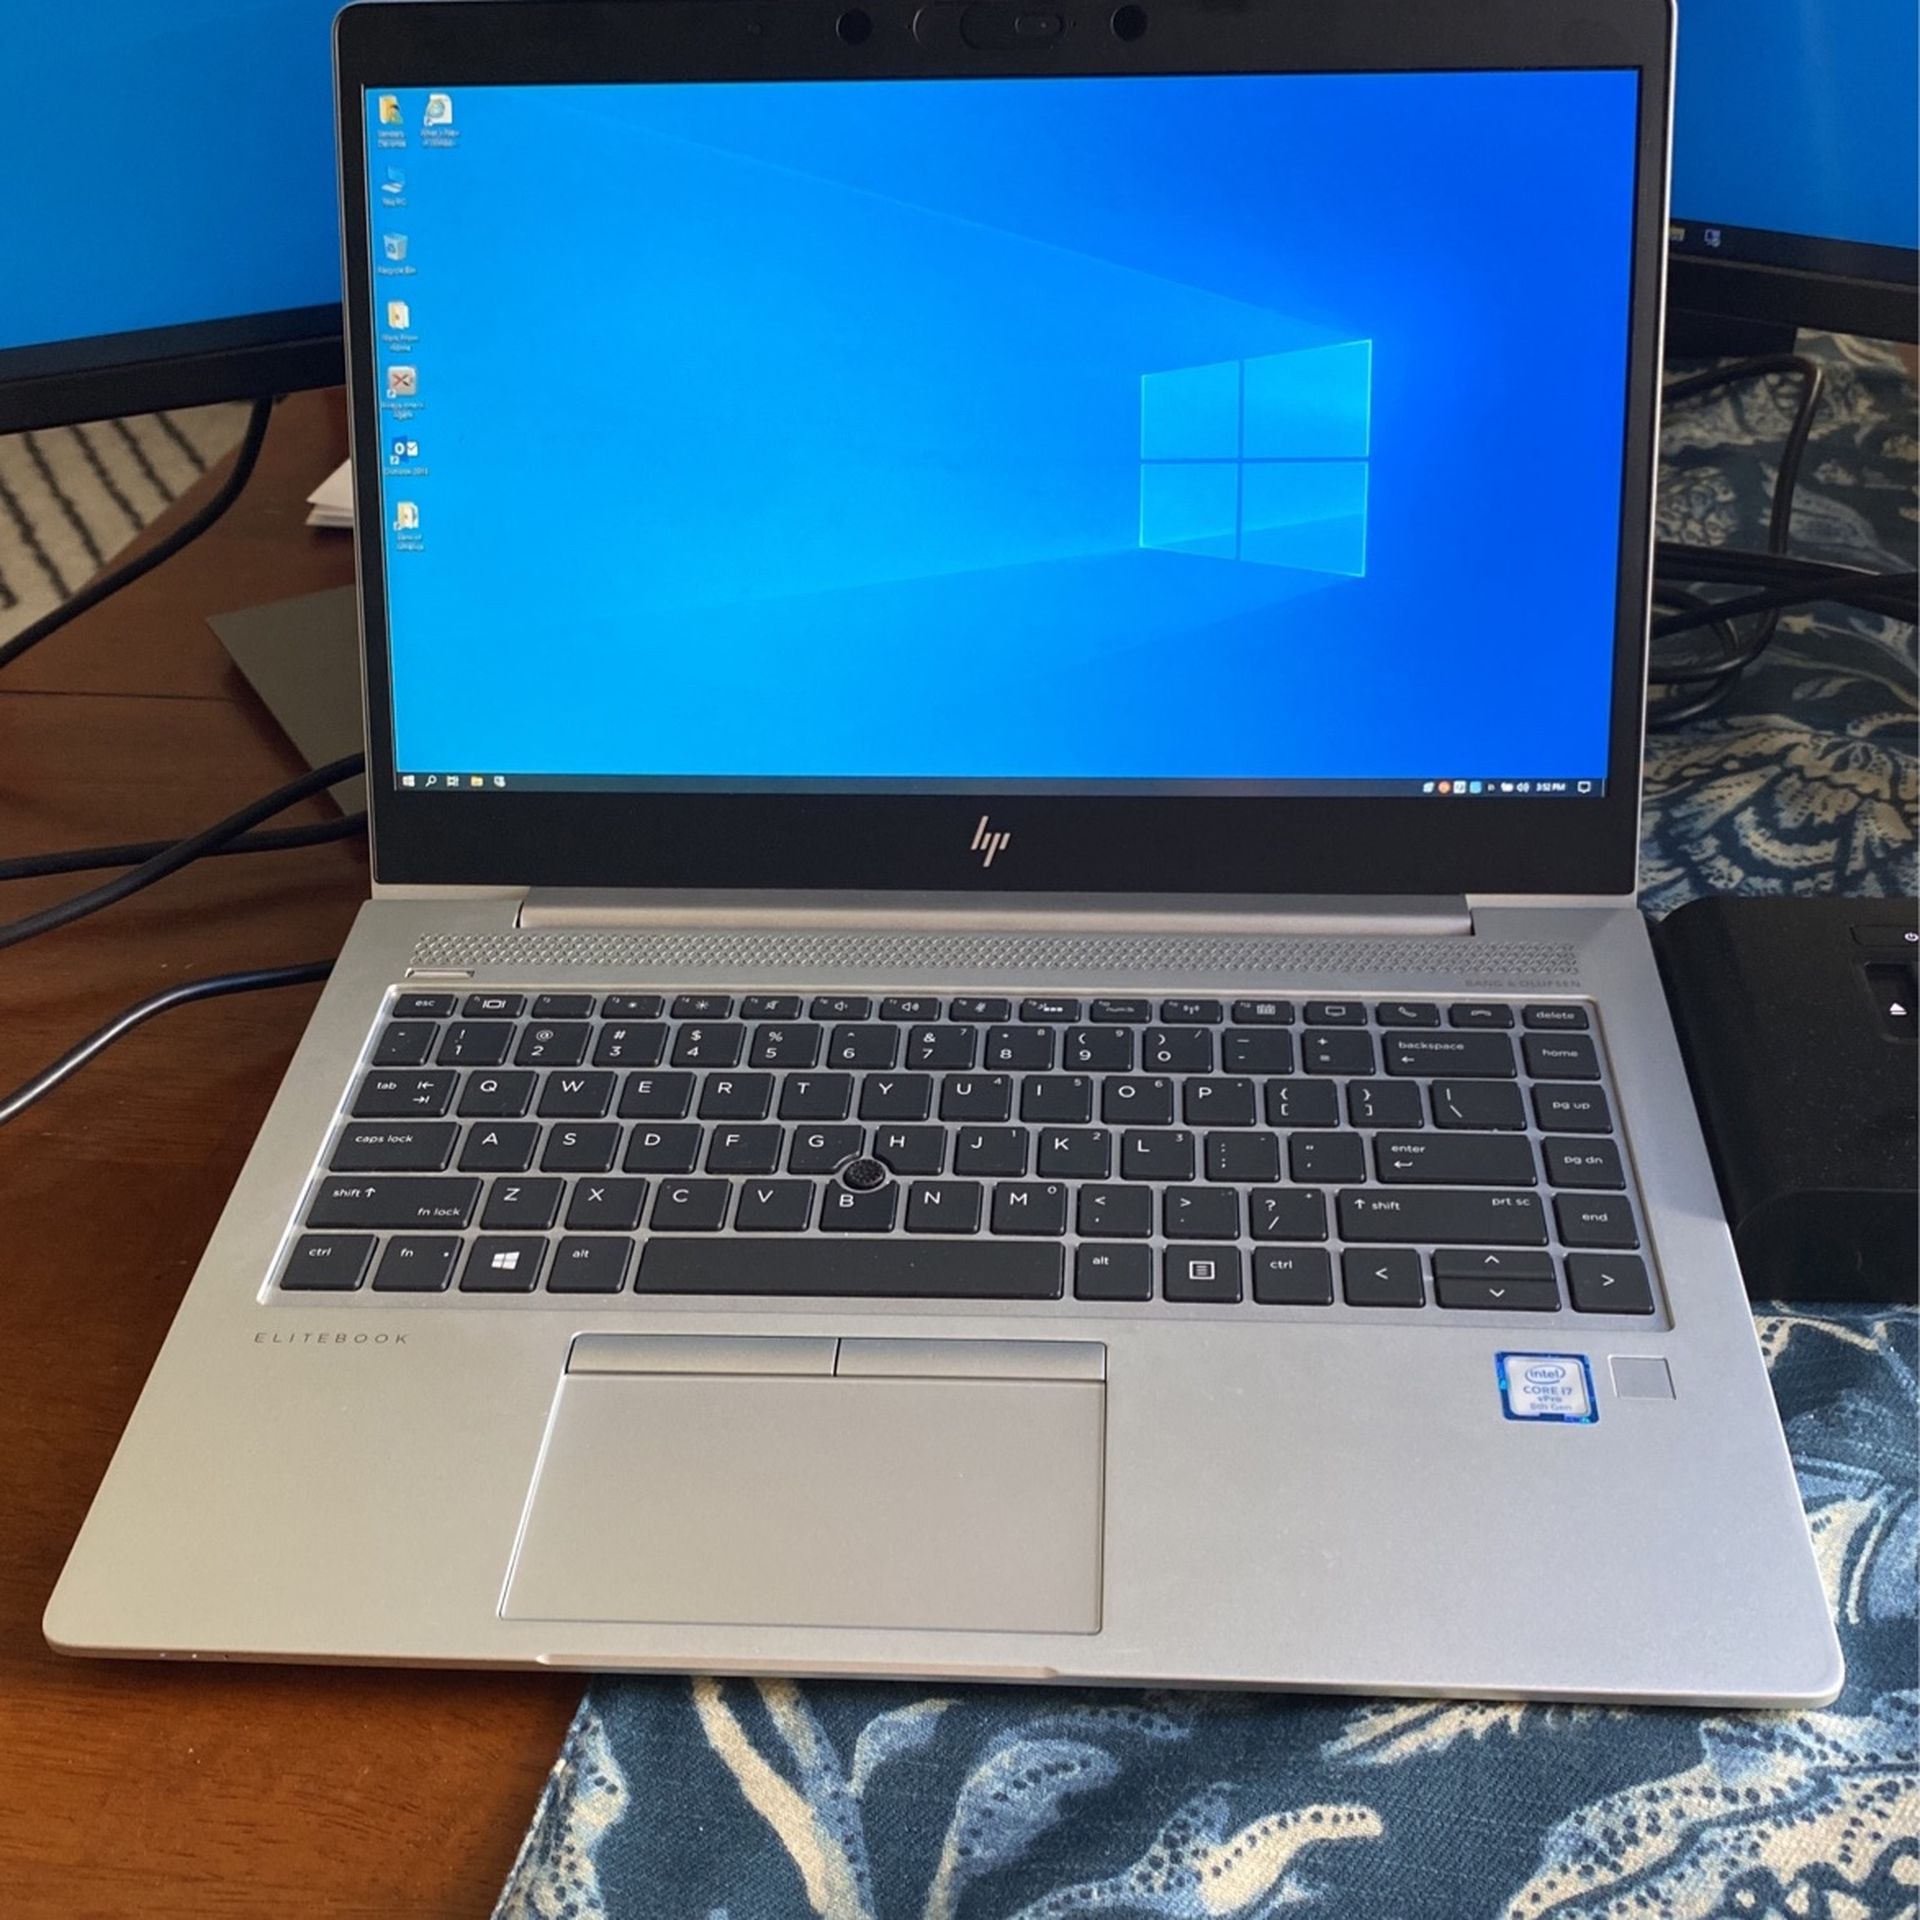 HP Elite book Core i7 vapor 8th Gen with Docking Station and Dual monitors (willing to sell seperatley)